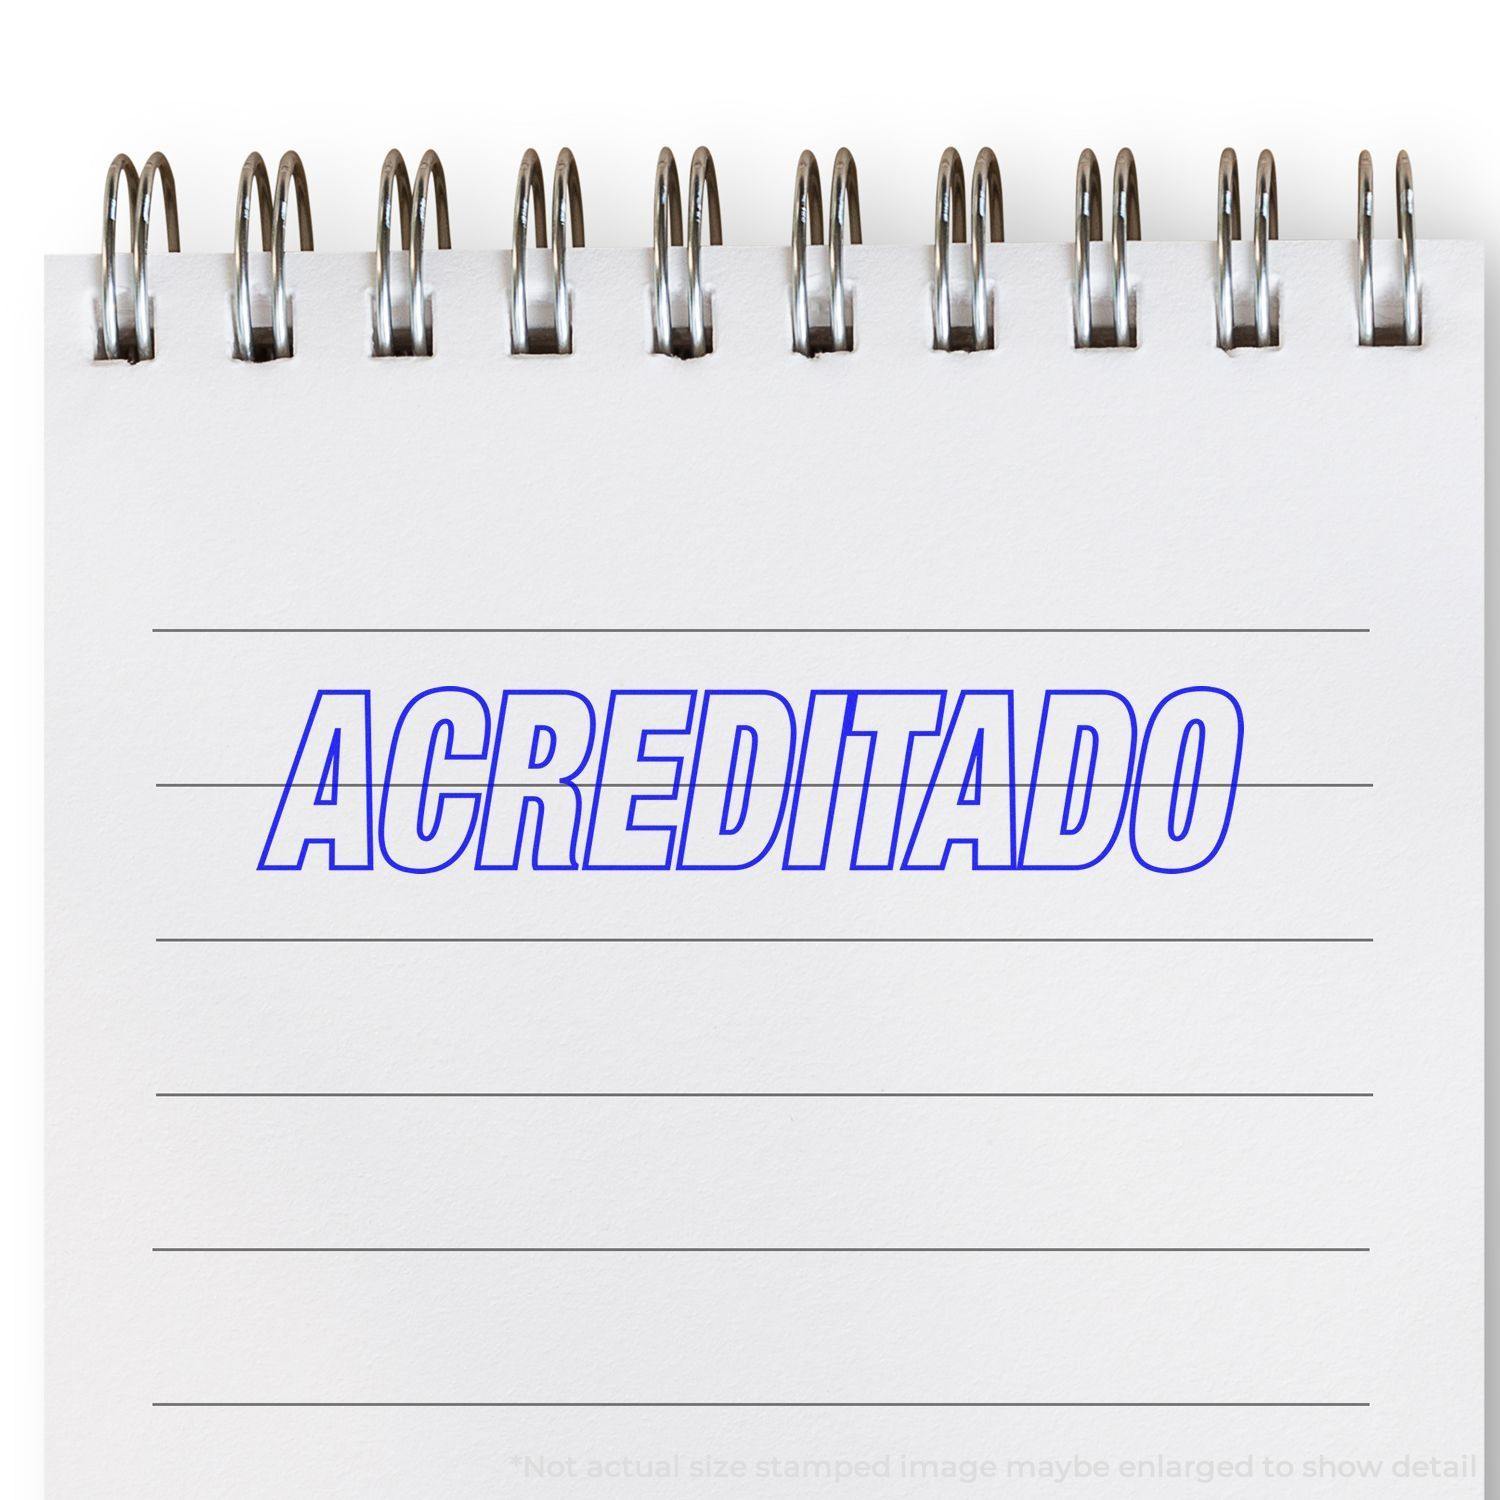 A self-inking stamp with a stamped image showing how the text "ACREDITADO" in an outline style is displayed after stamping.